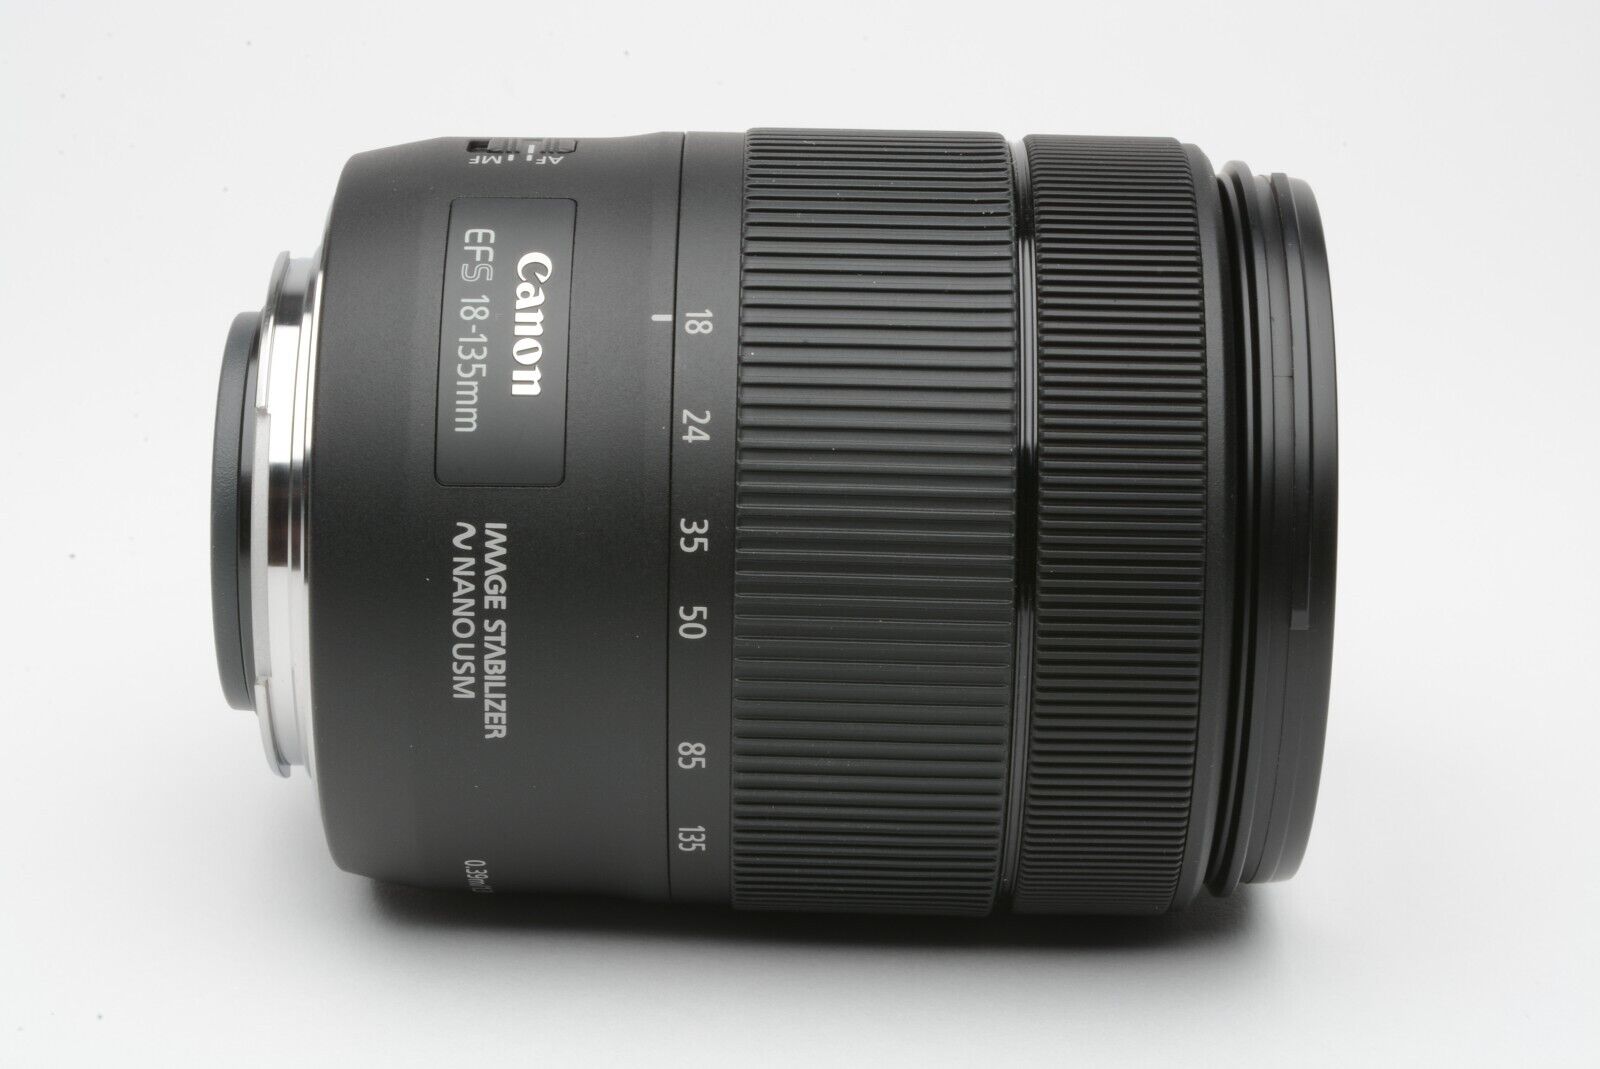 Canon EFS 18-135mm f3.5-5.6 IS USM zoom lens, barely used